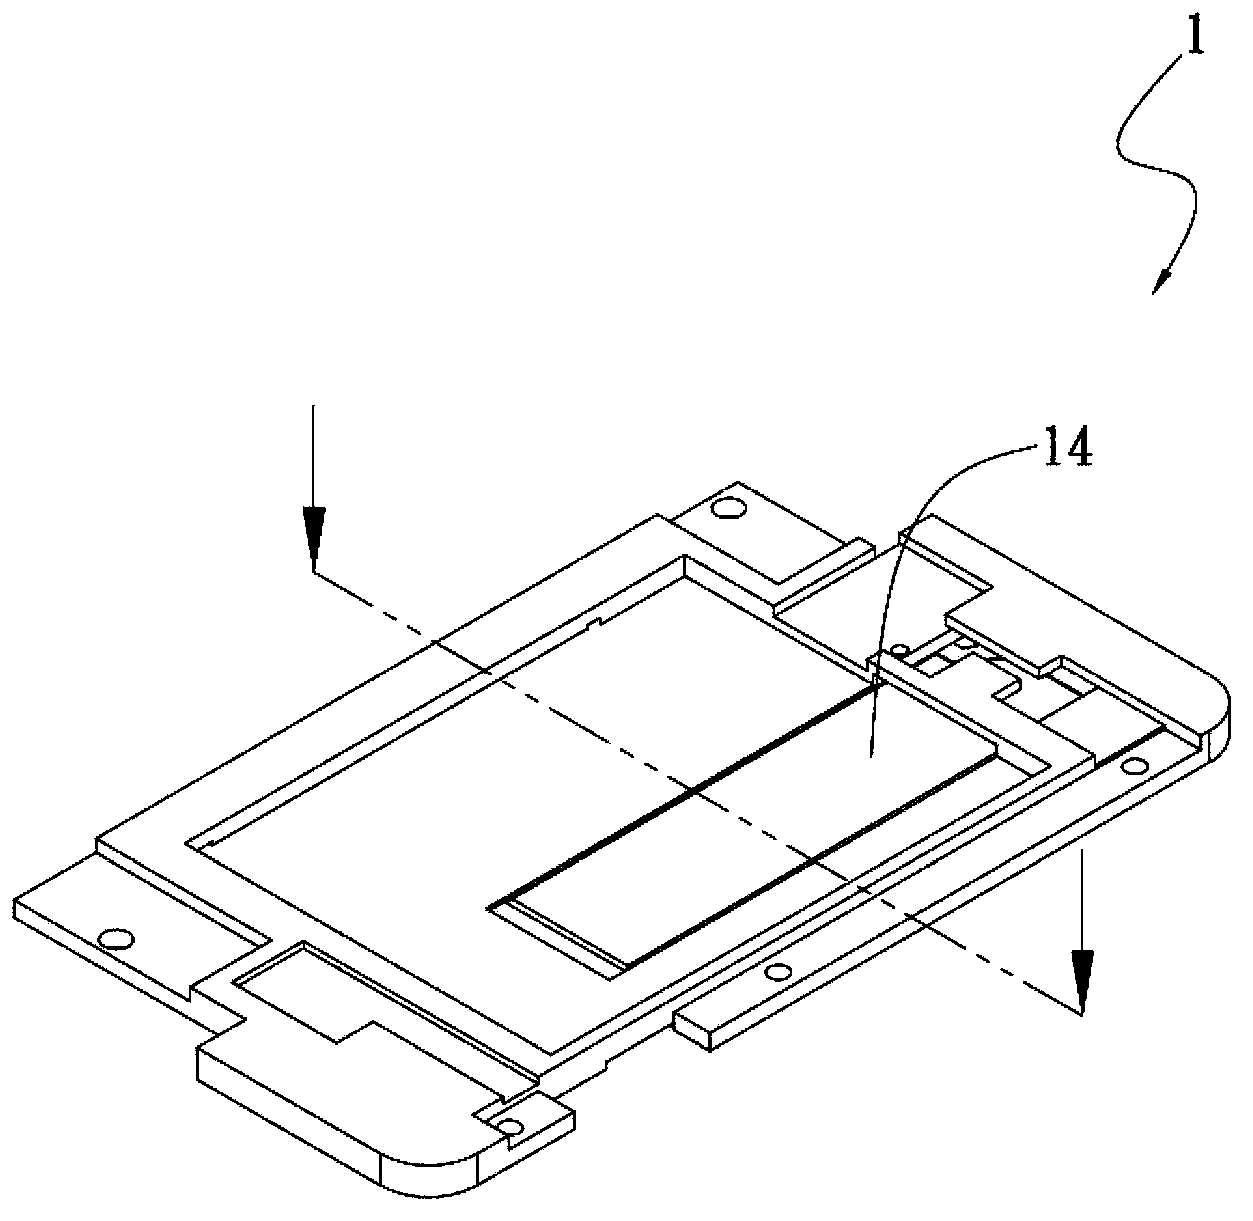 Heat radiation structure of handheld mobile device